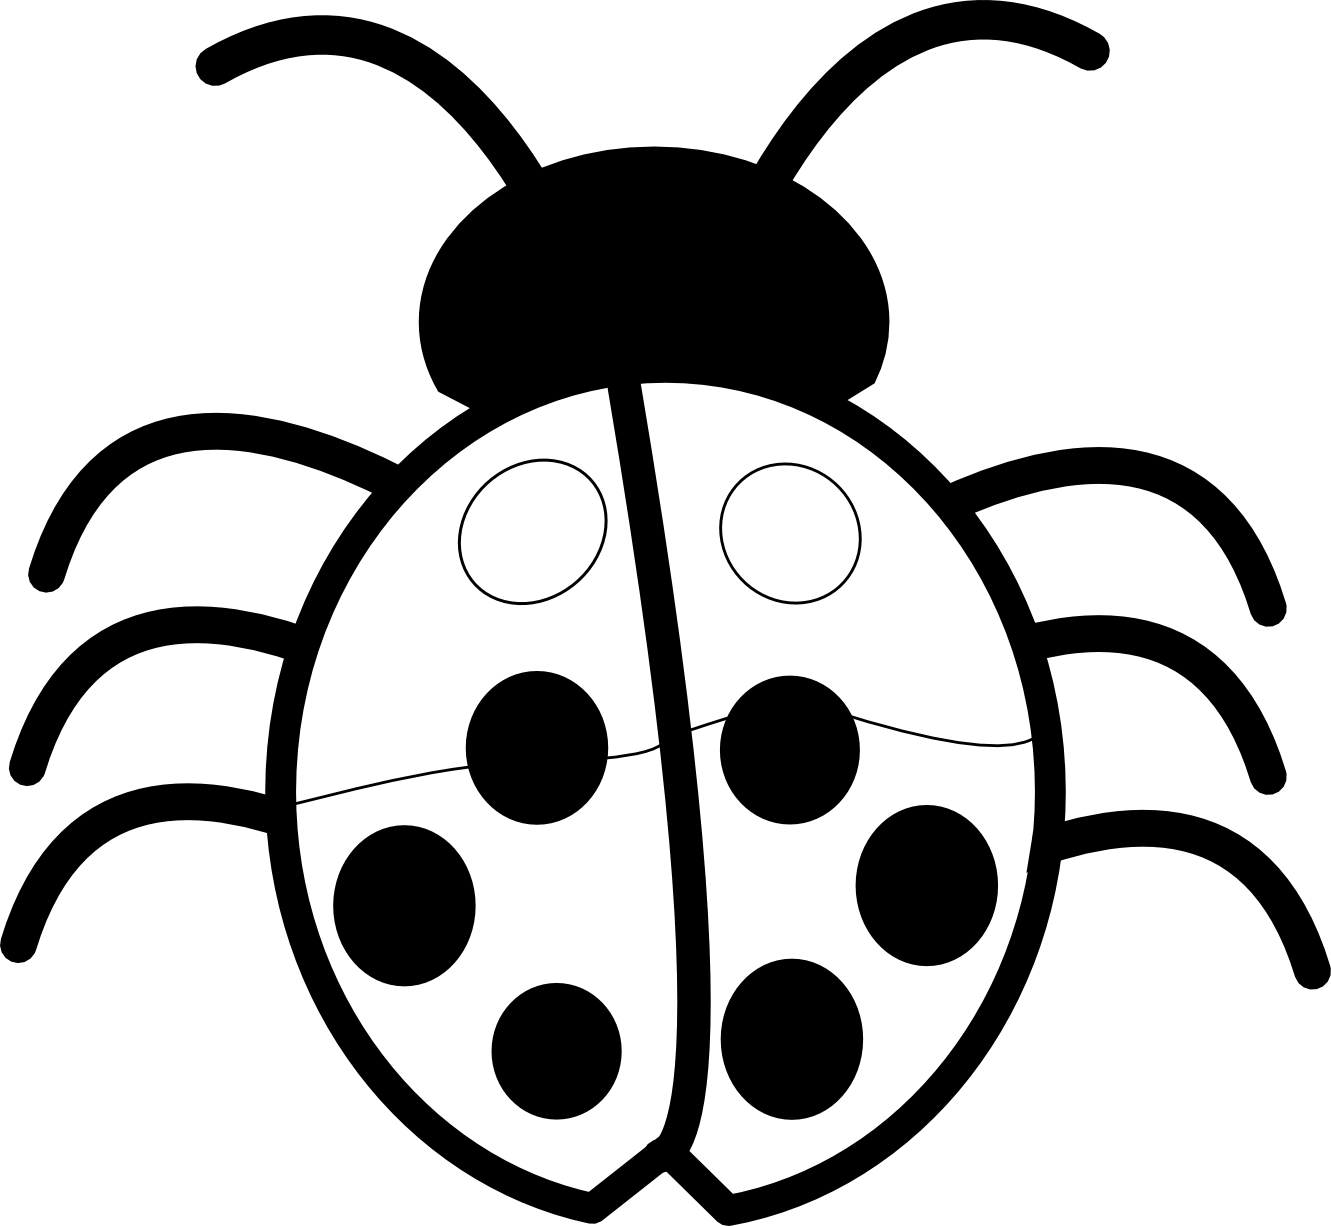 Ladybug Outline Black And White - Clipart library